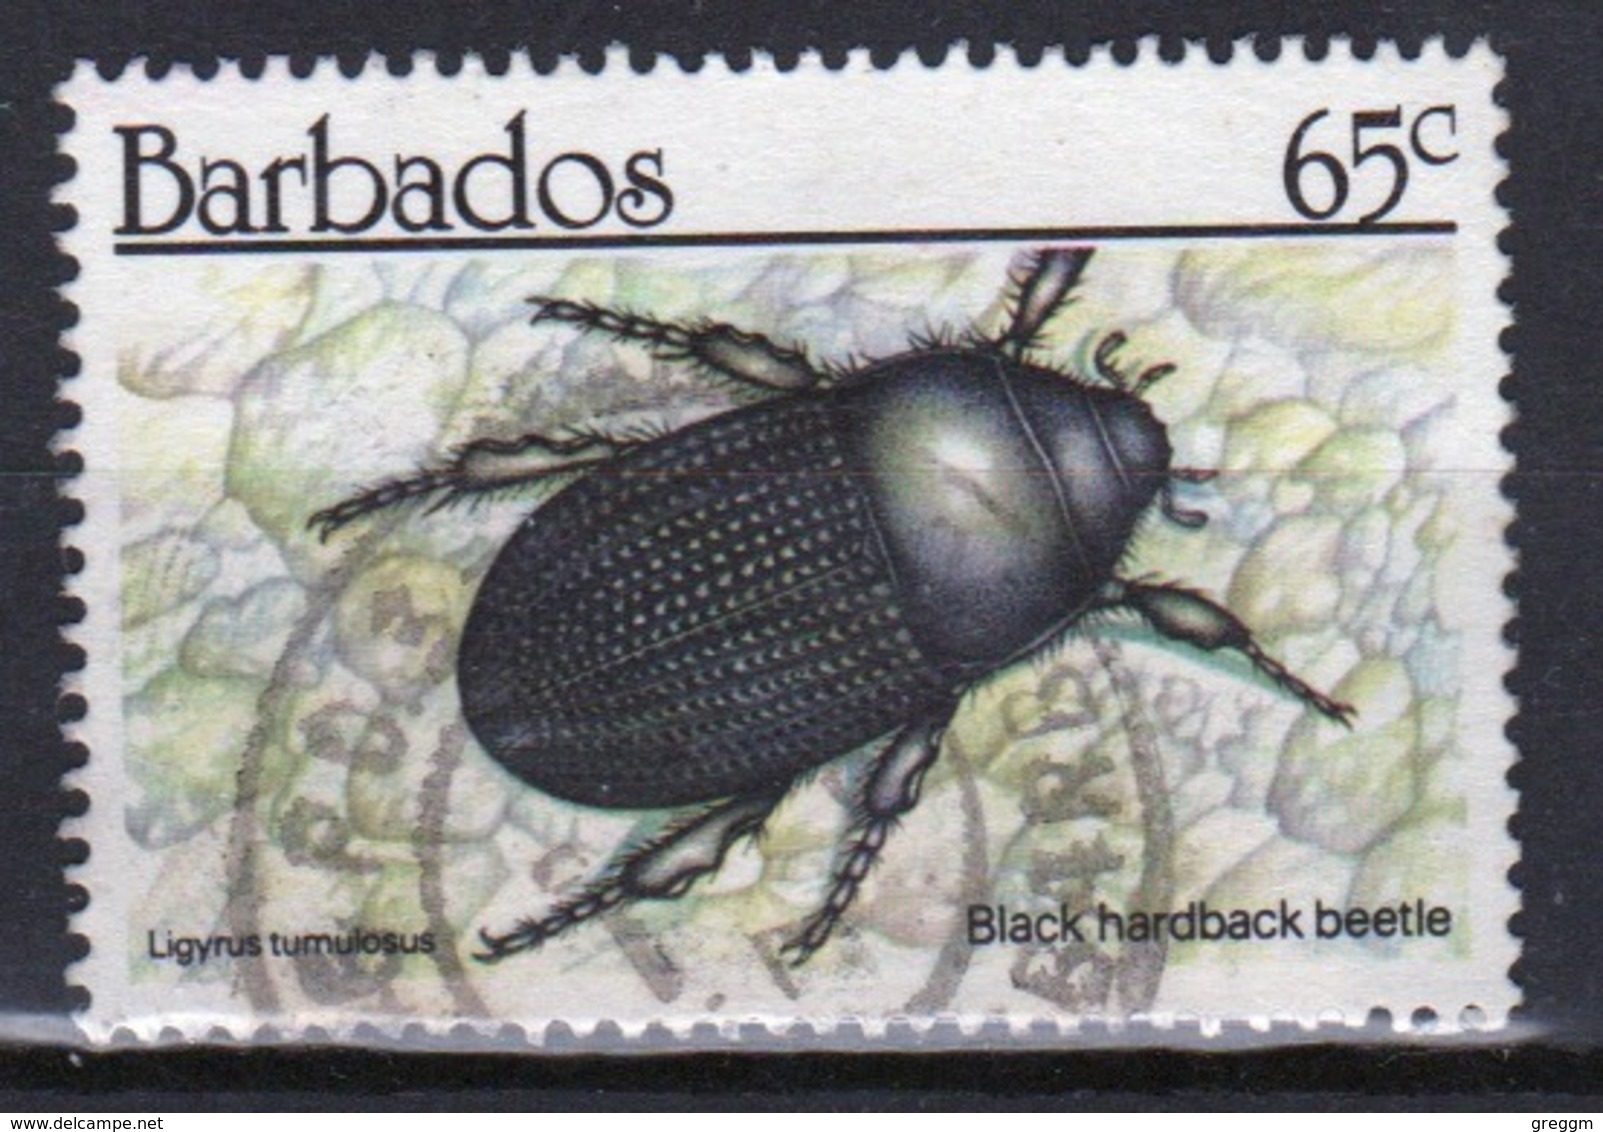 Barbados Single 65c Stamp From The 1990 Insects Series. - Barbados (1966-...)